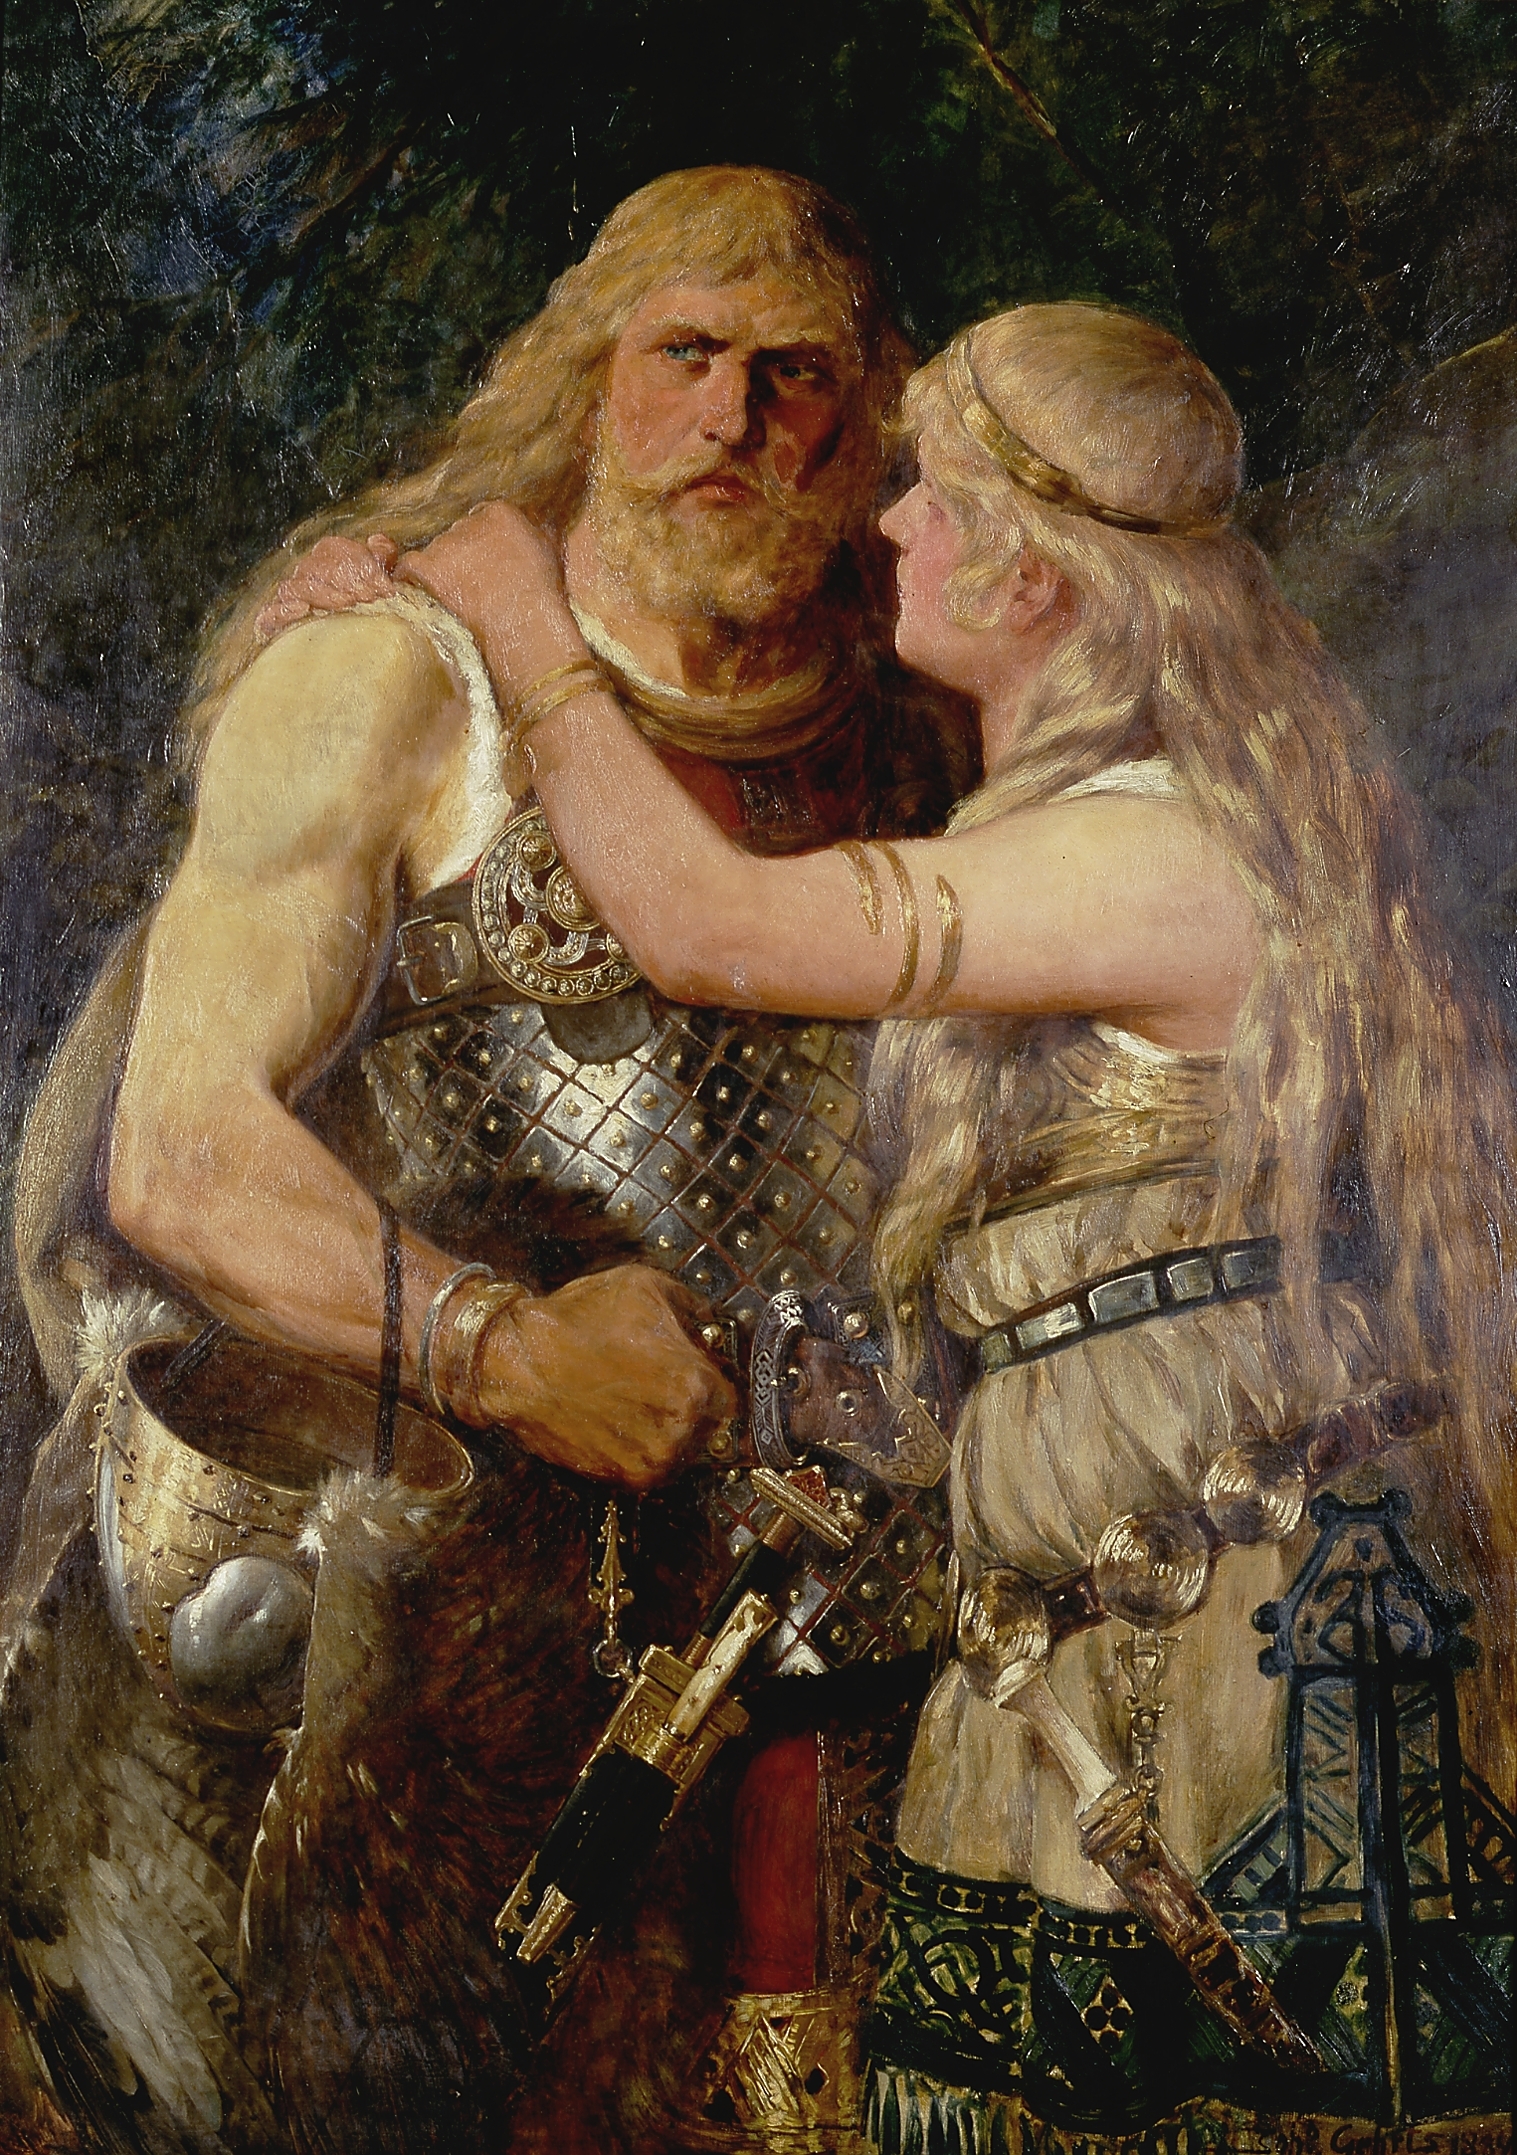 A warrior saying farewell to his wife before heading off to battle